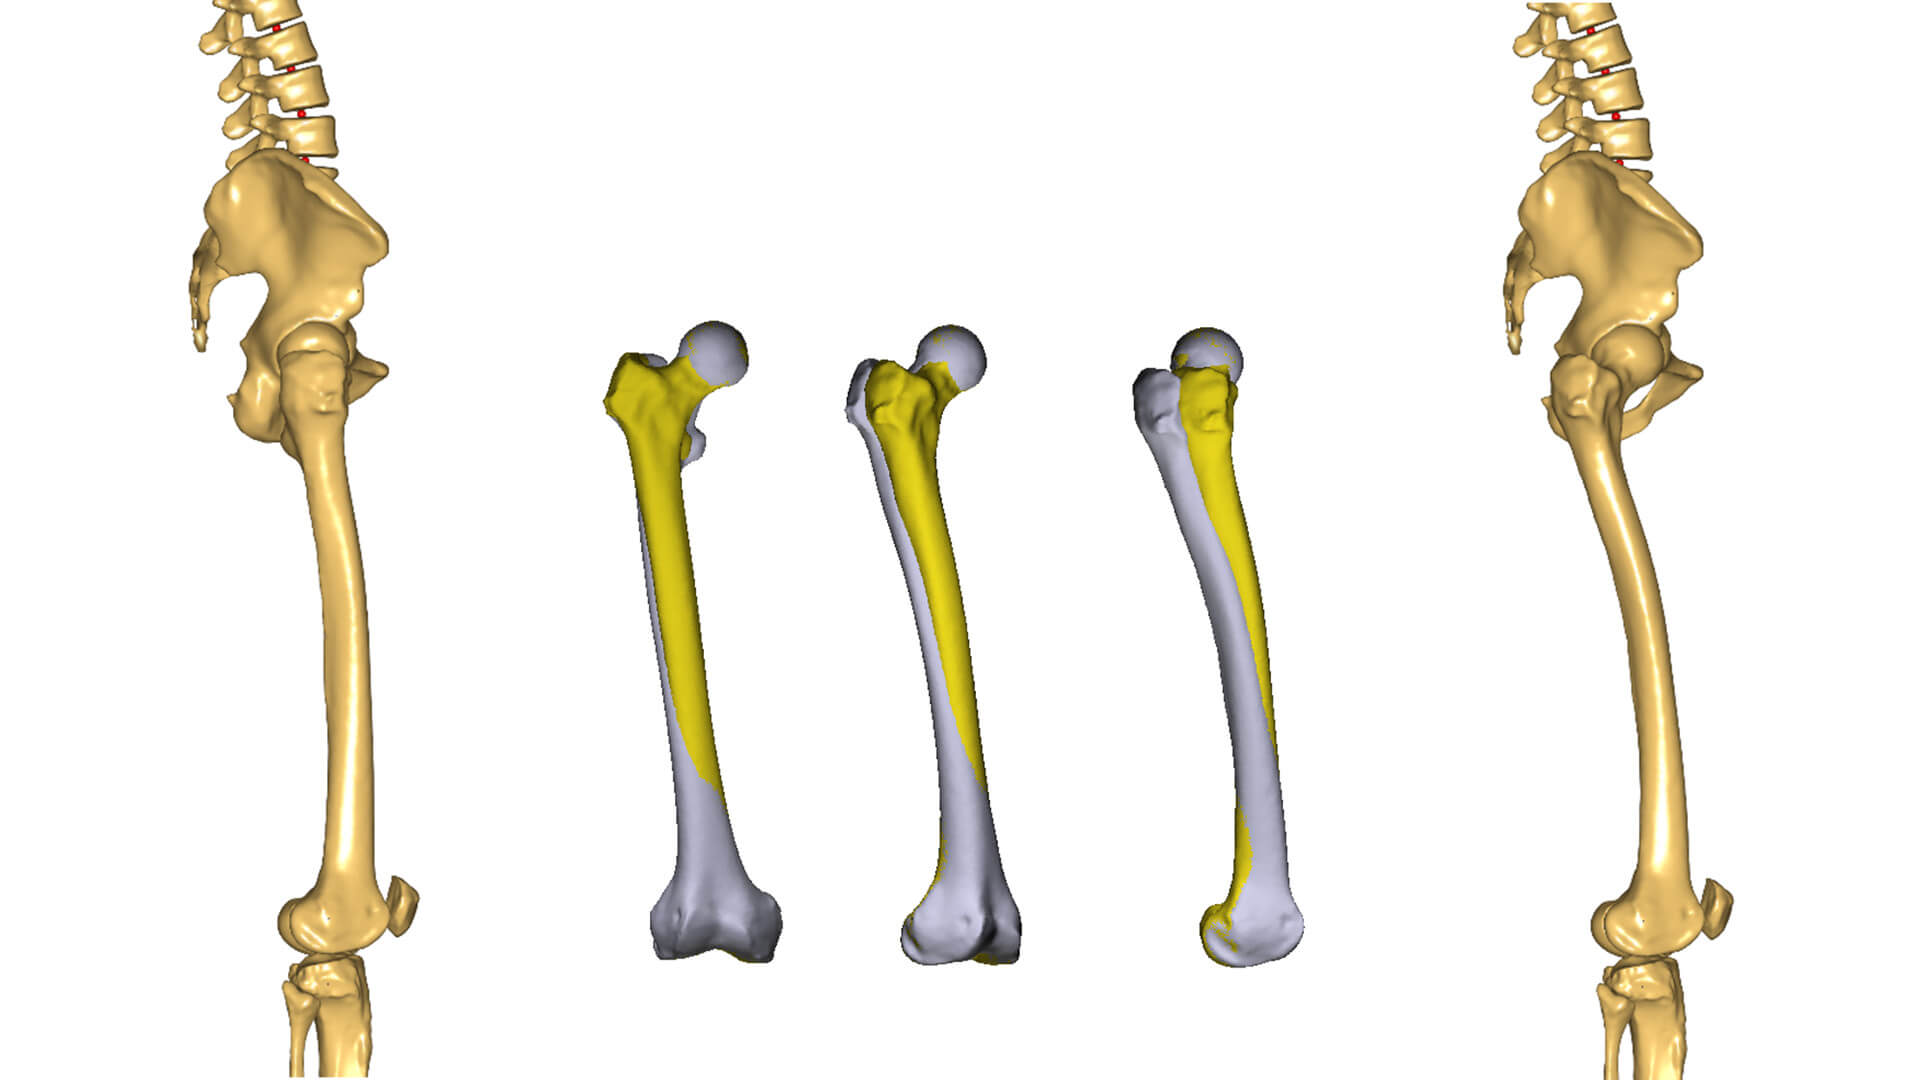 Modeling subject-specific femoral torsion for the analysis of lower-limb joint loads